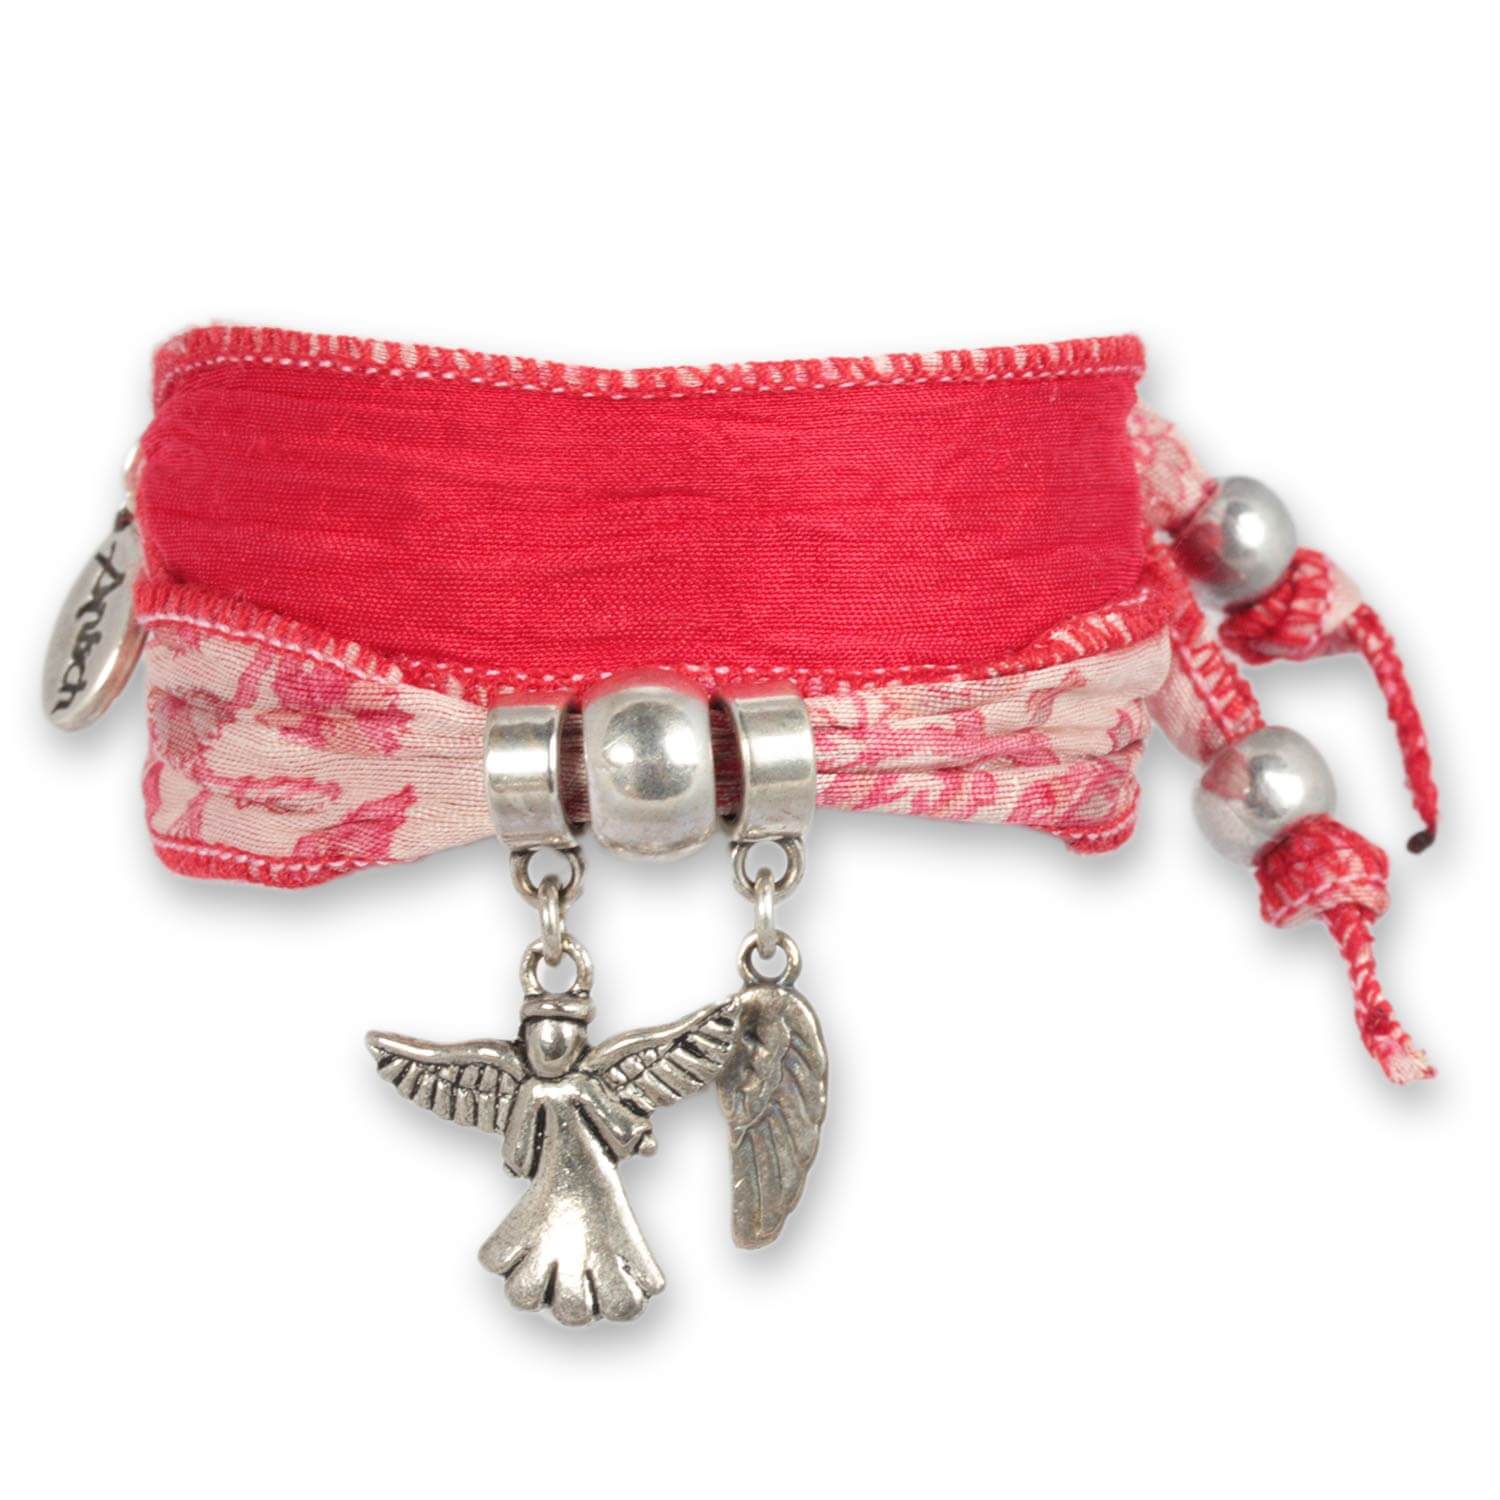 Cherry Red - Wings of Hope Armband aus indischen Saris